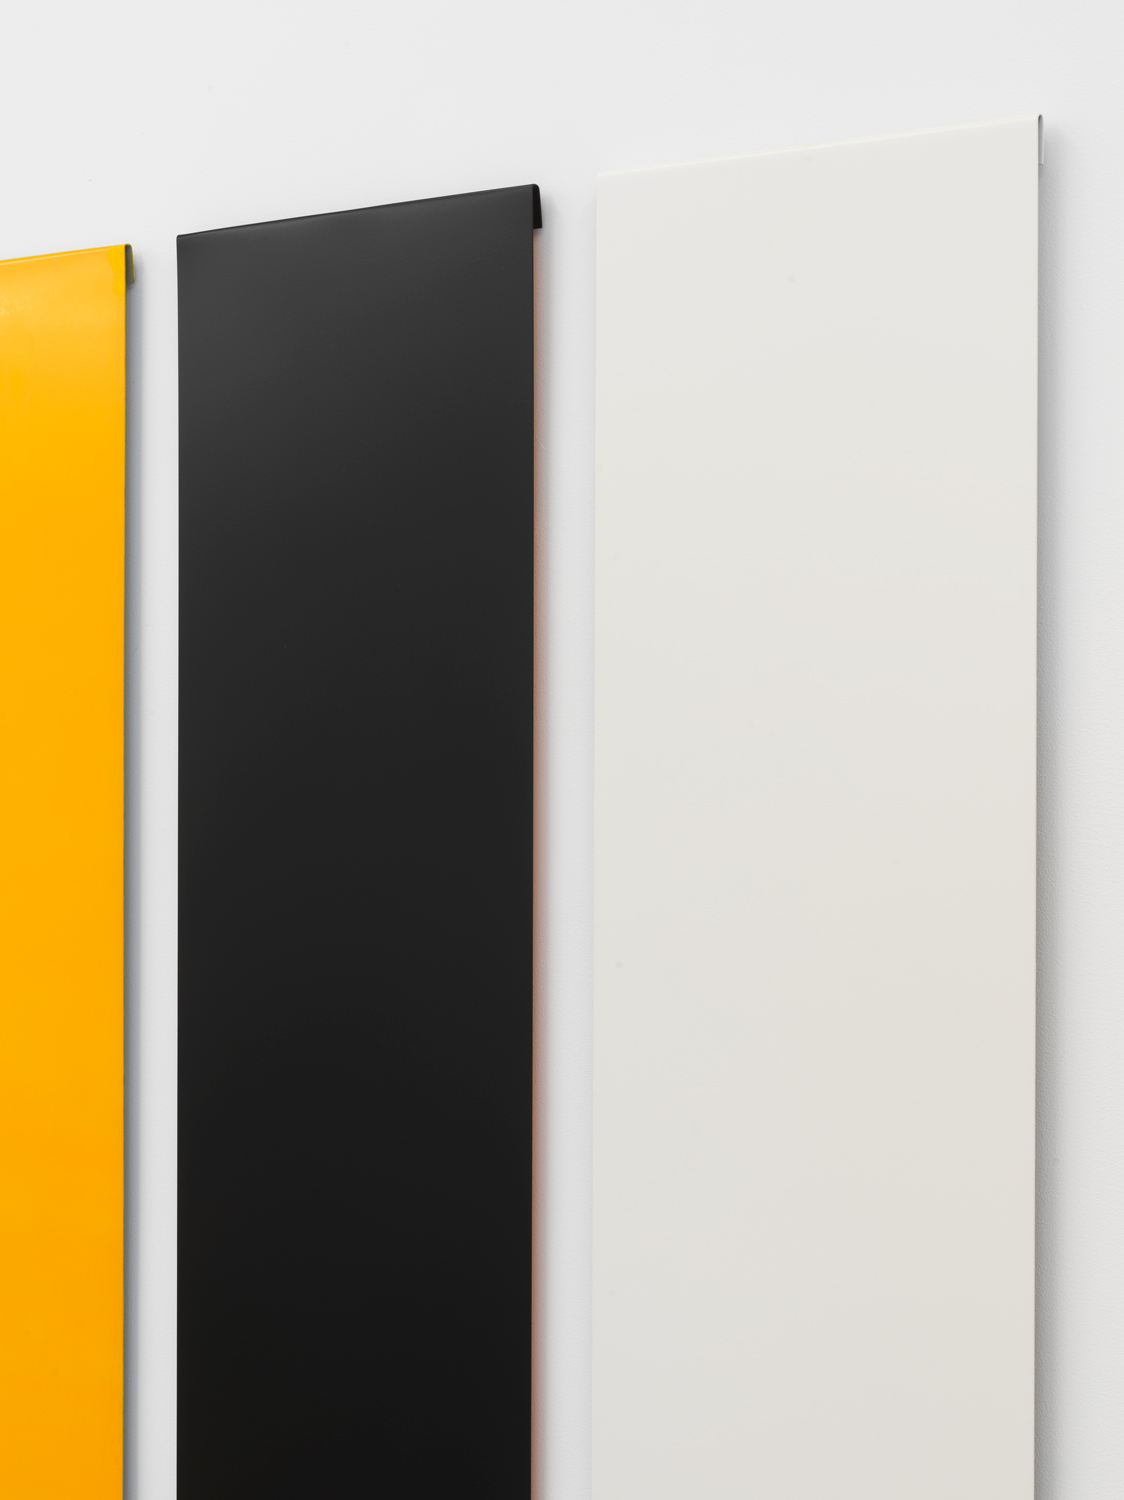 Untitled (Aluminum Module) detail, 1974-2019, acrylic lacquer on aluminum, each module 46.75 x 12 in; overall 46.75 x 68 in.